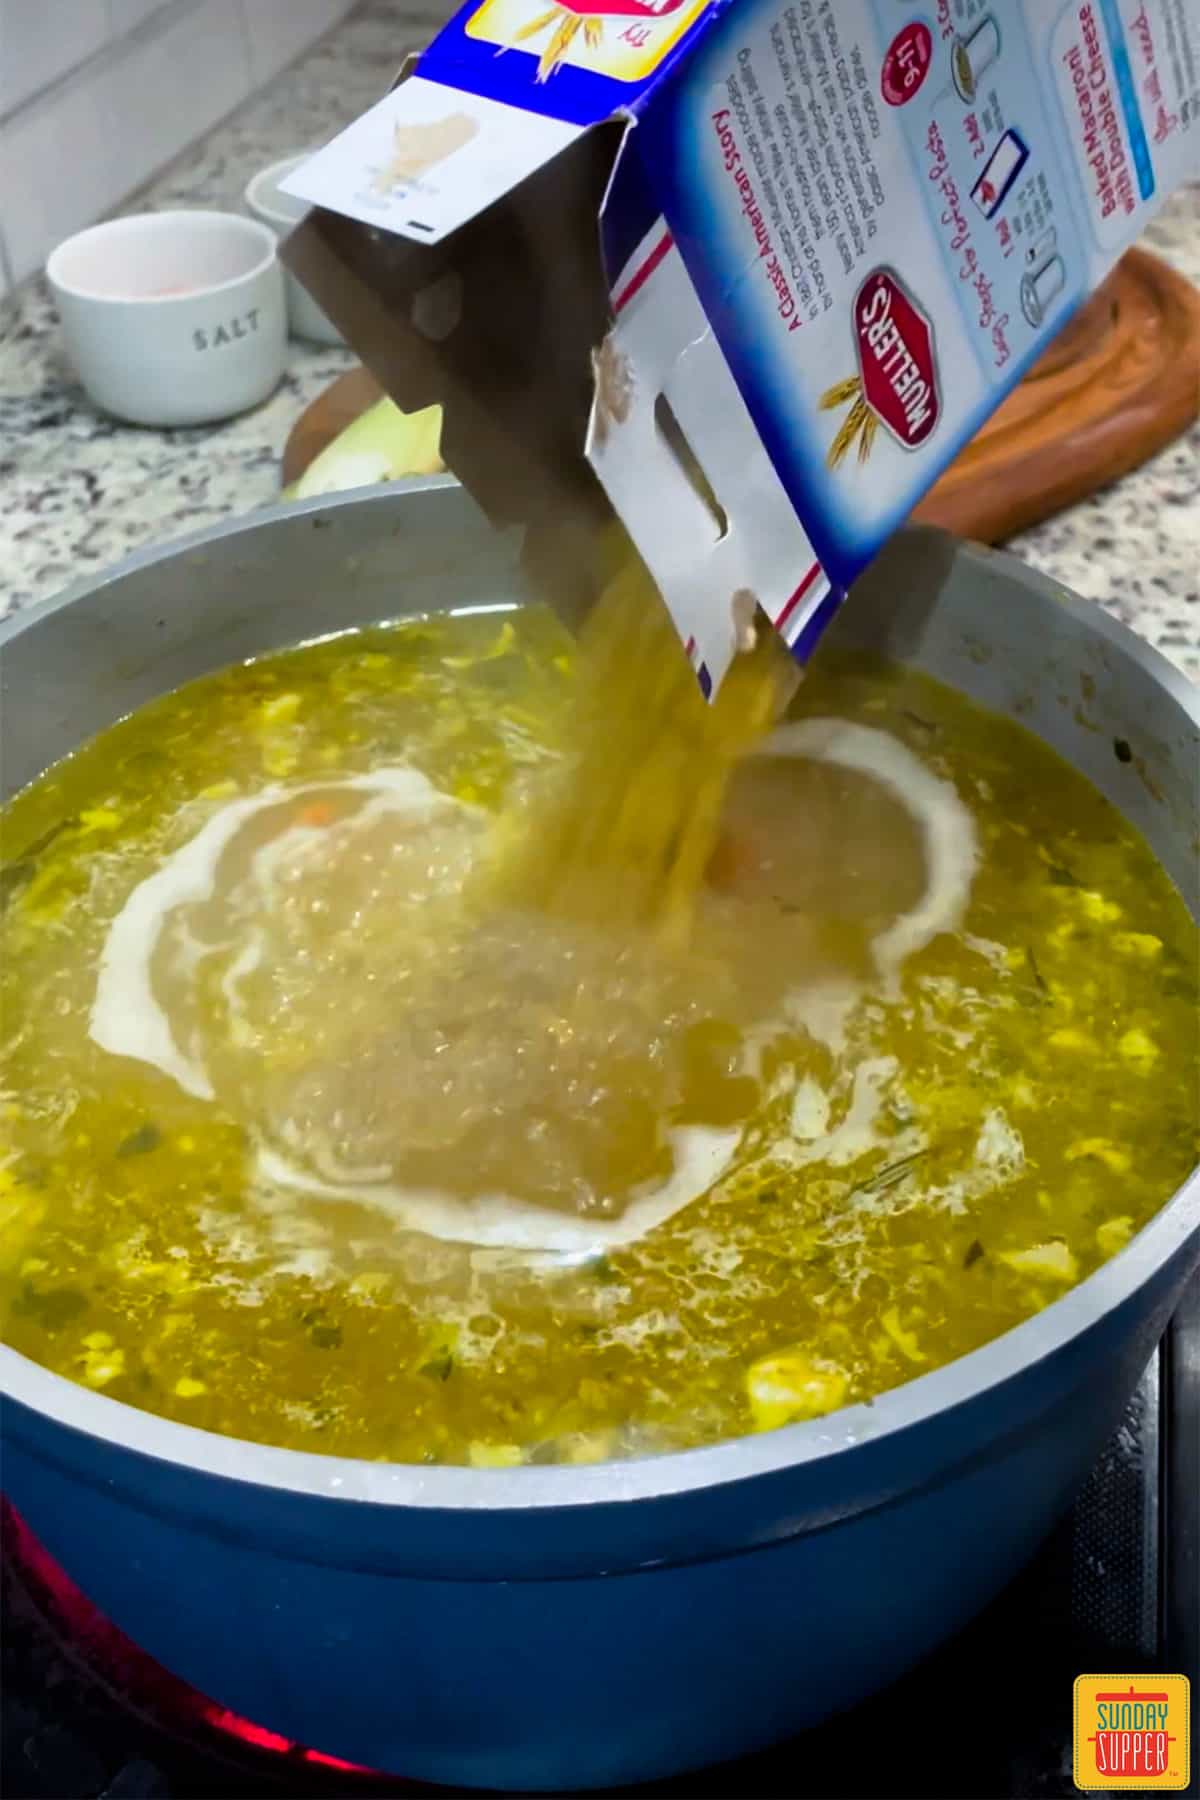 Adding noodles to turkey carcass soup